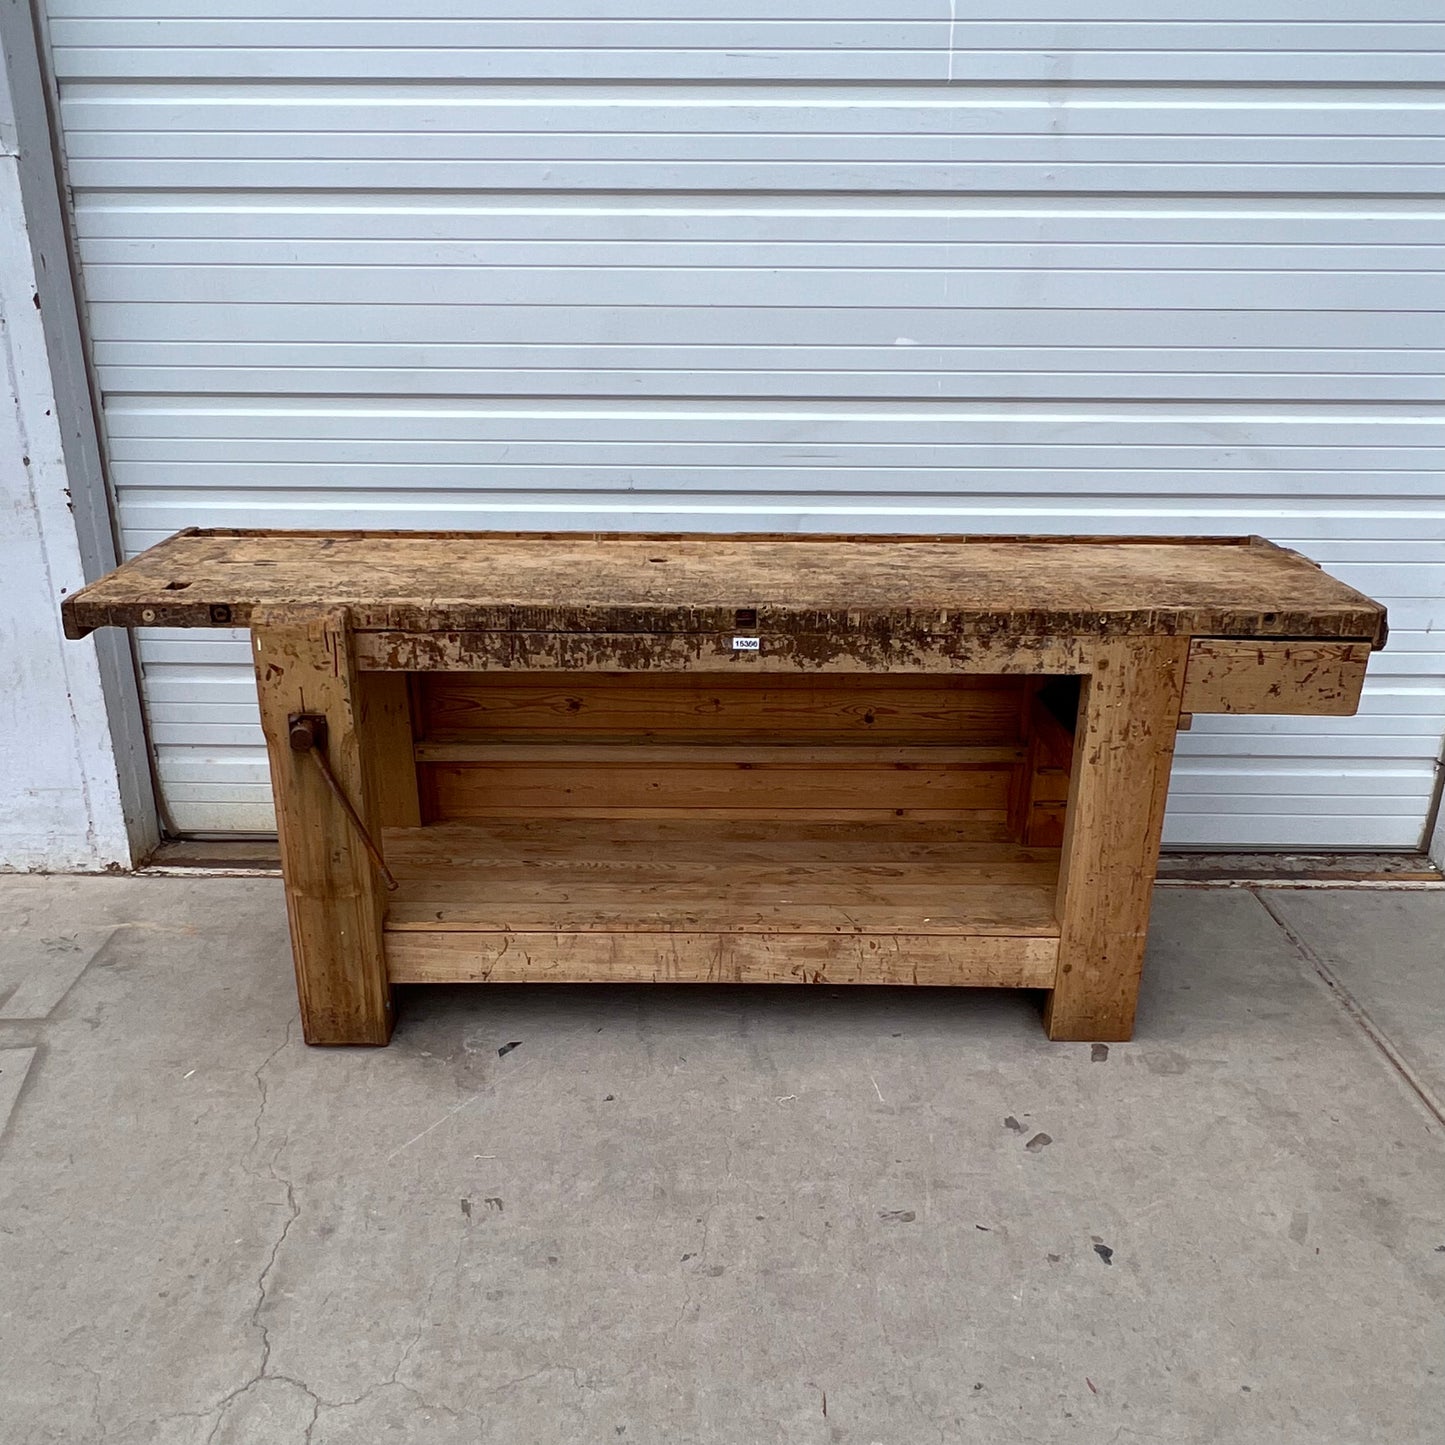 Wood Work Table with Vise and Single Drawer